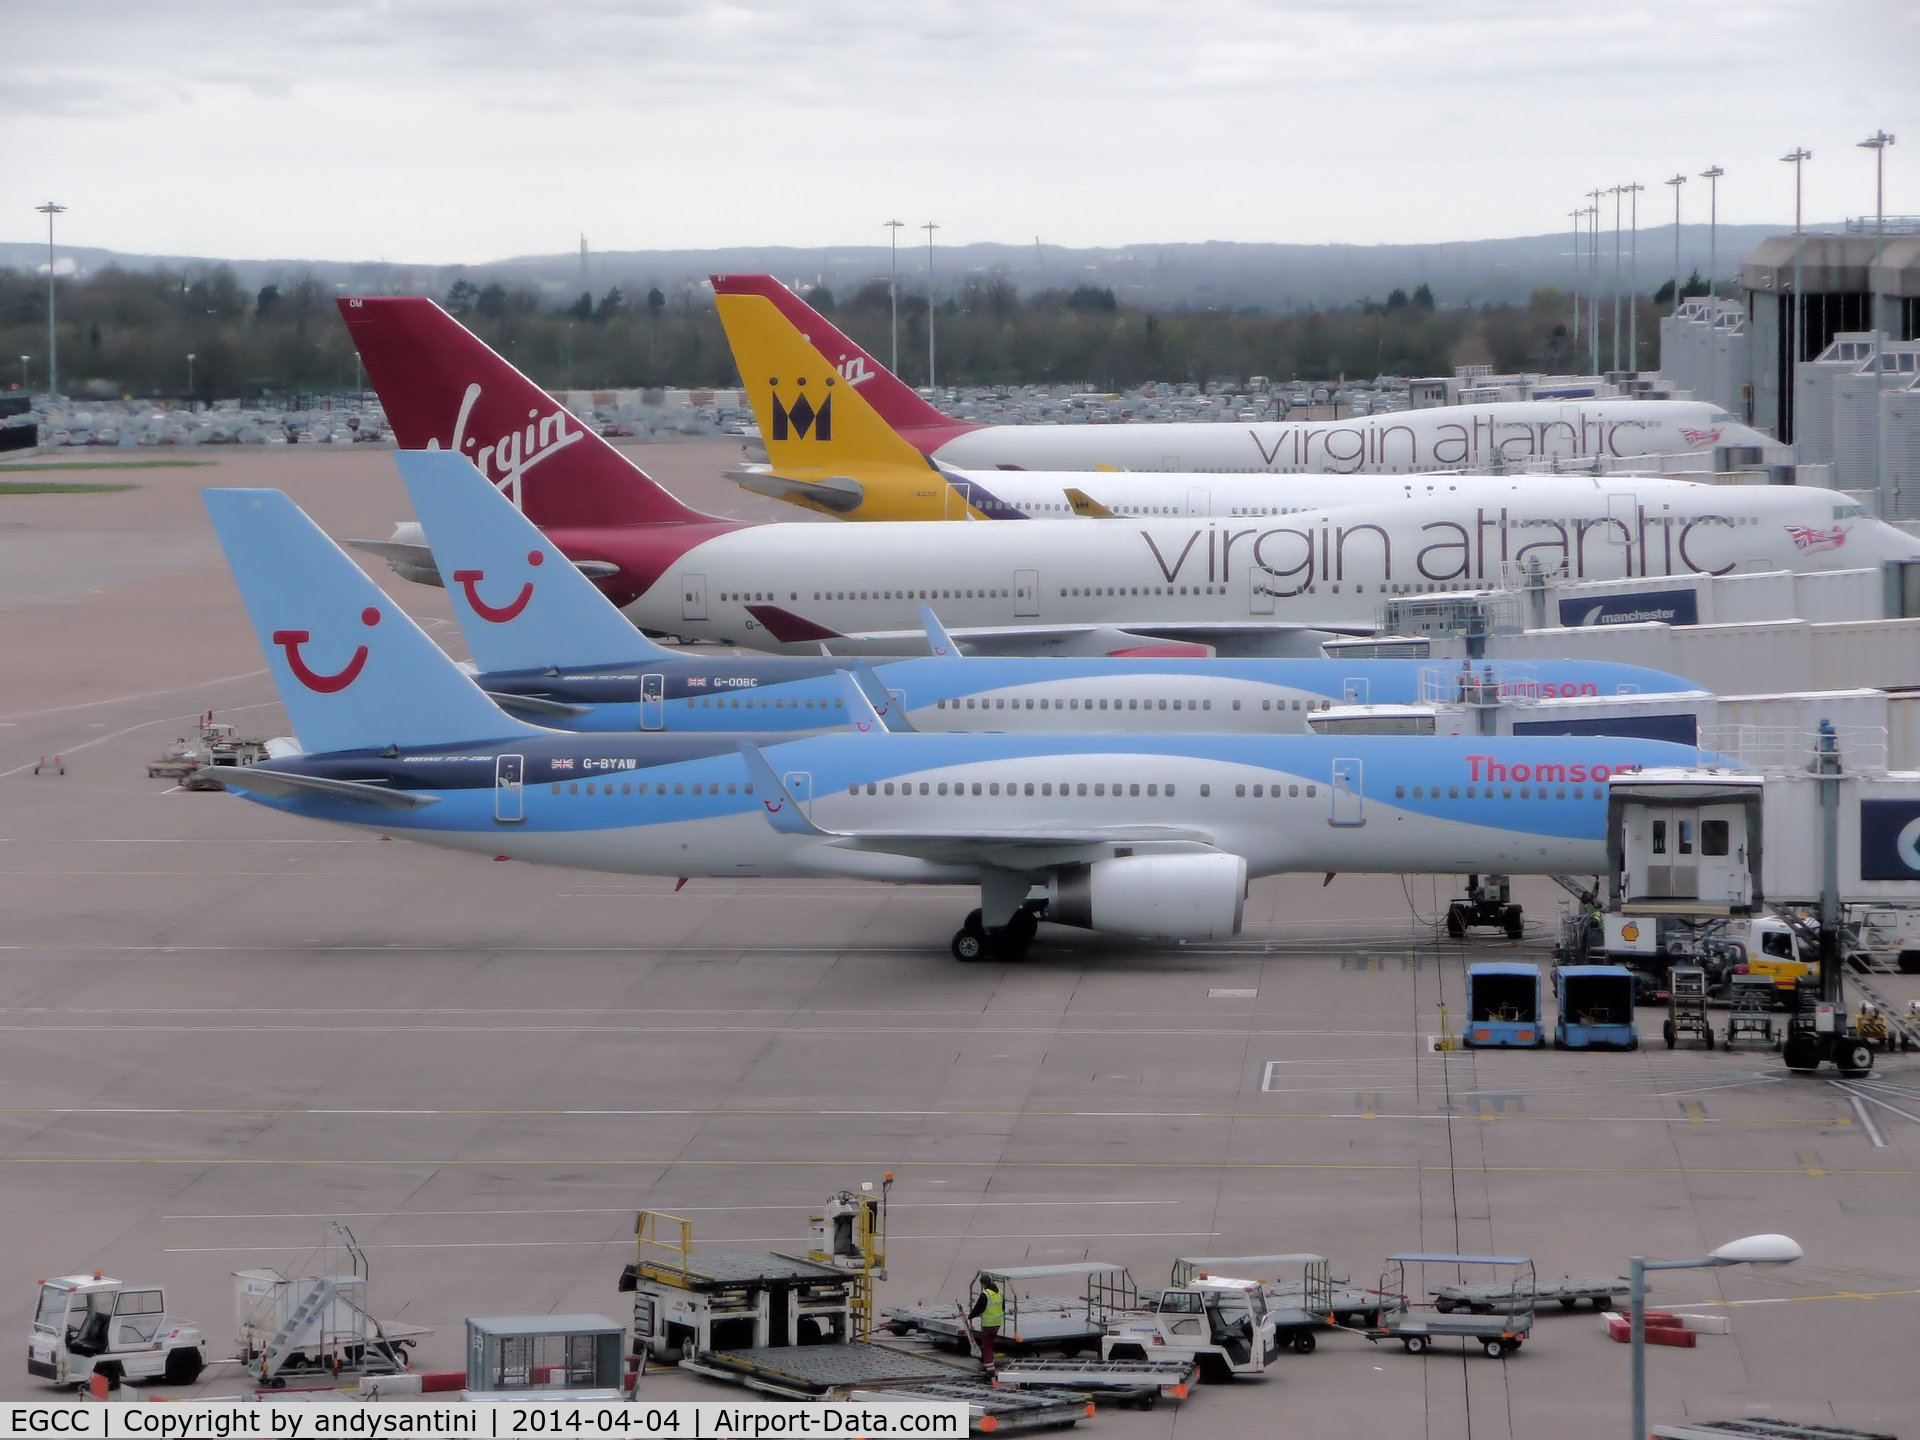 Manchester Airport, Manchester, England United Kingdom (EGCC) - VIR/MON/BAL on there stands/gates on T2 